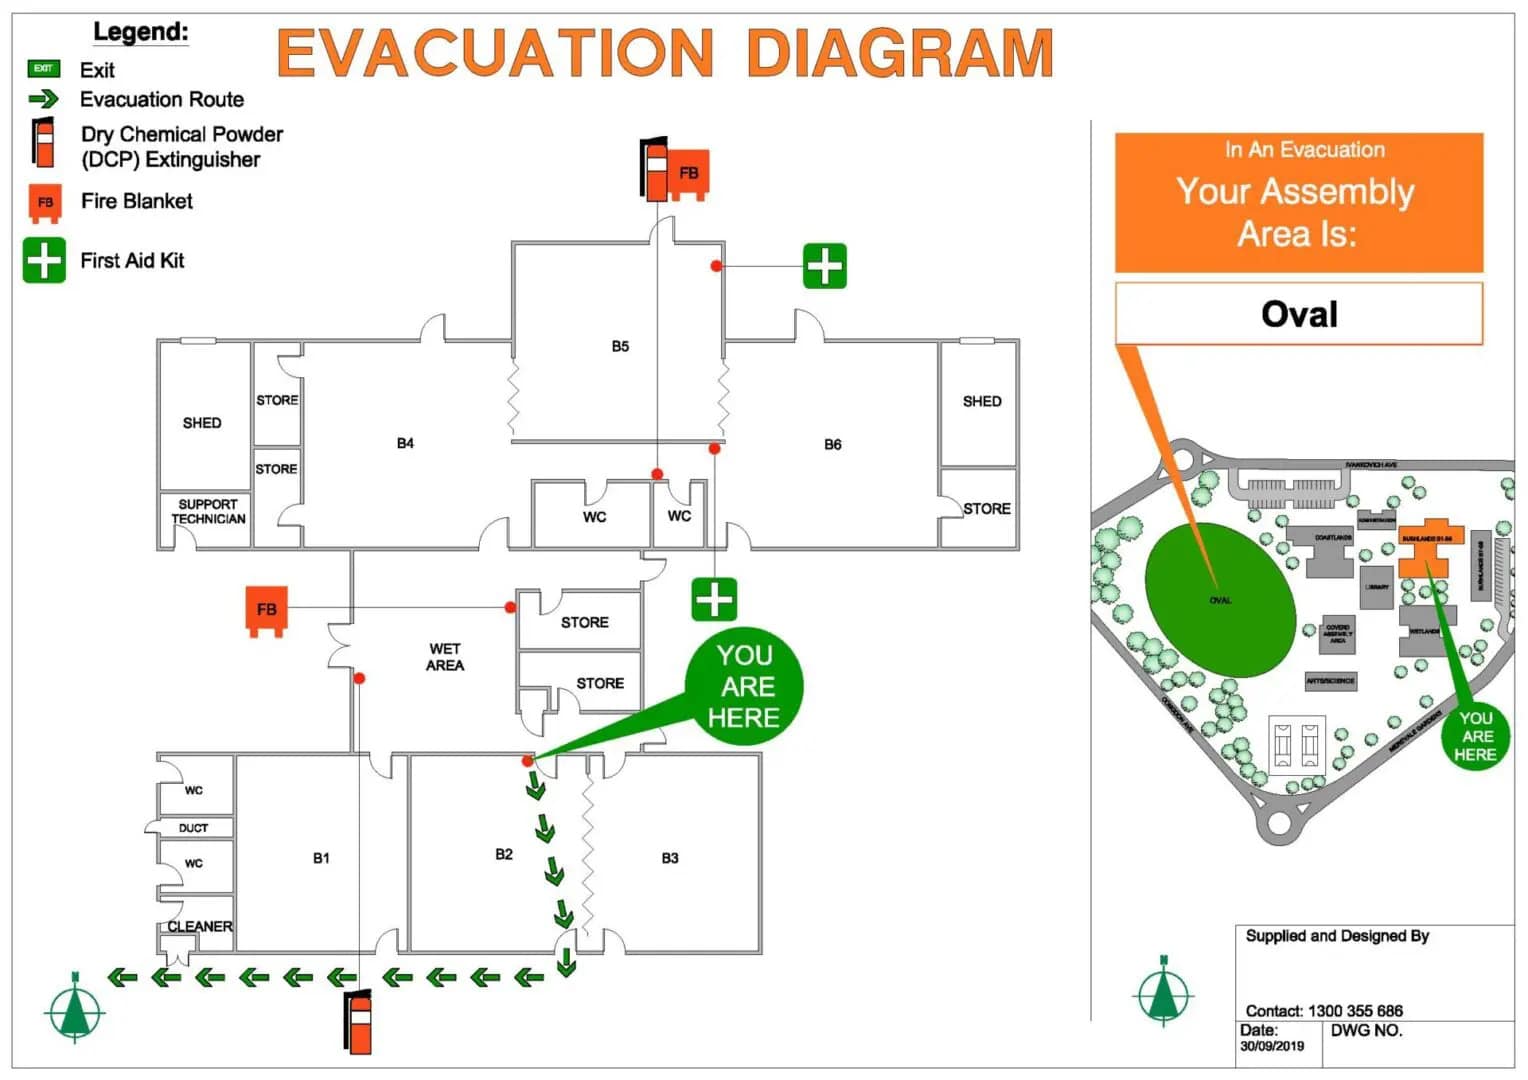 An image of a comprehensive emergency evacuation diagram used for safe exits.